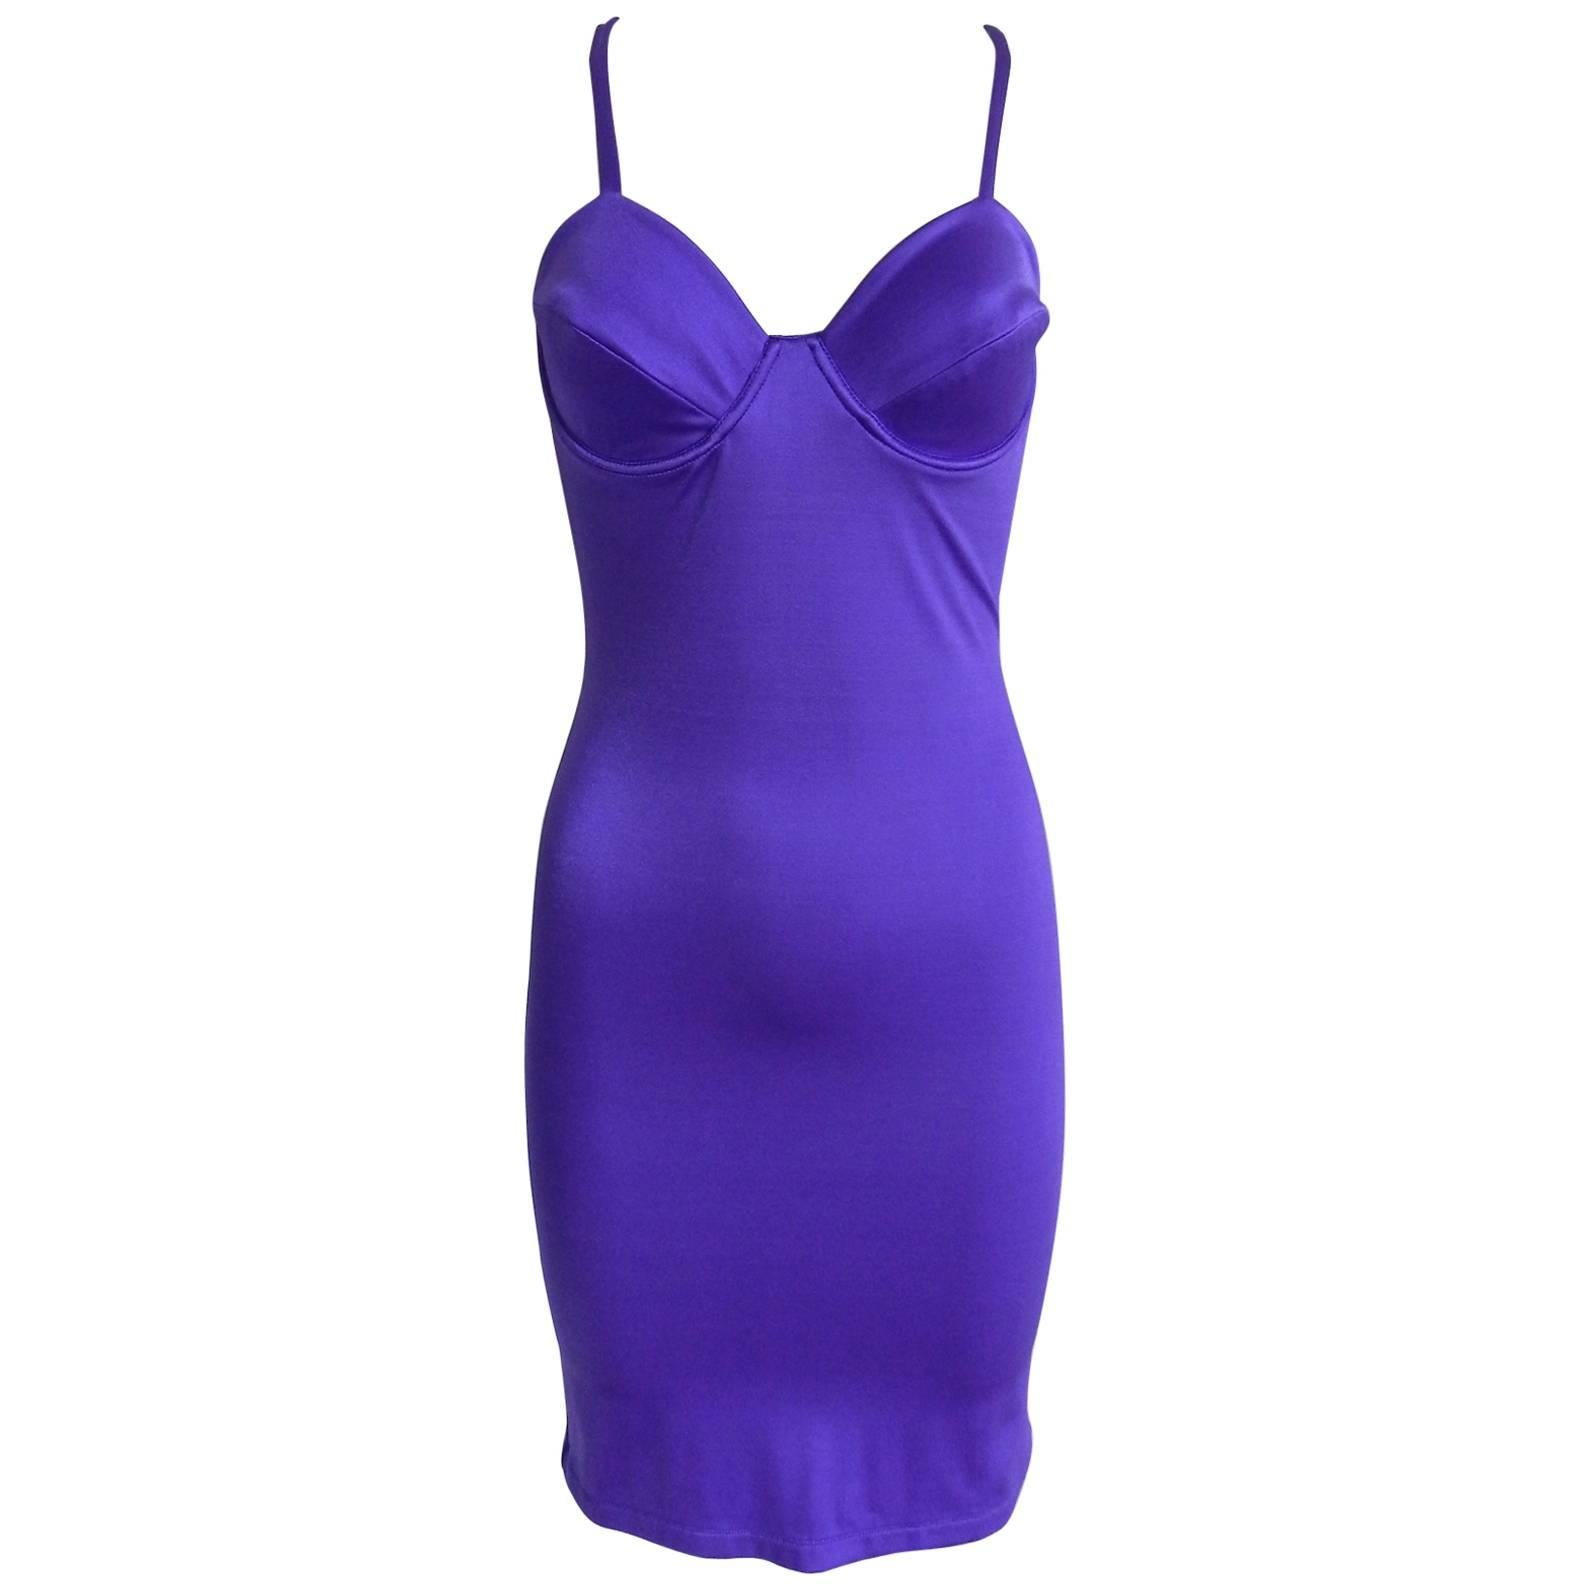 Versus by Gianni Versace Vintage Spring 1994 Electric purple Bodycon Dress